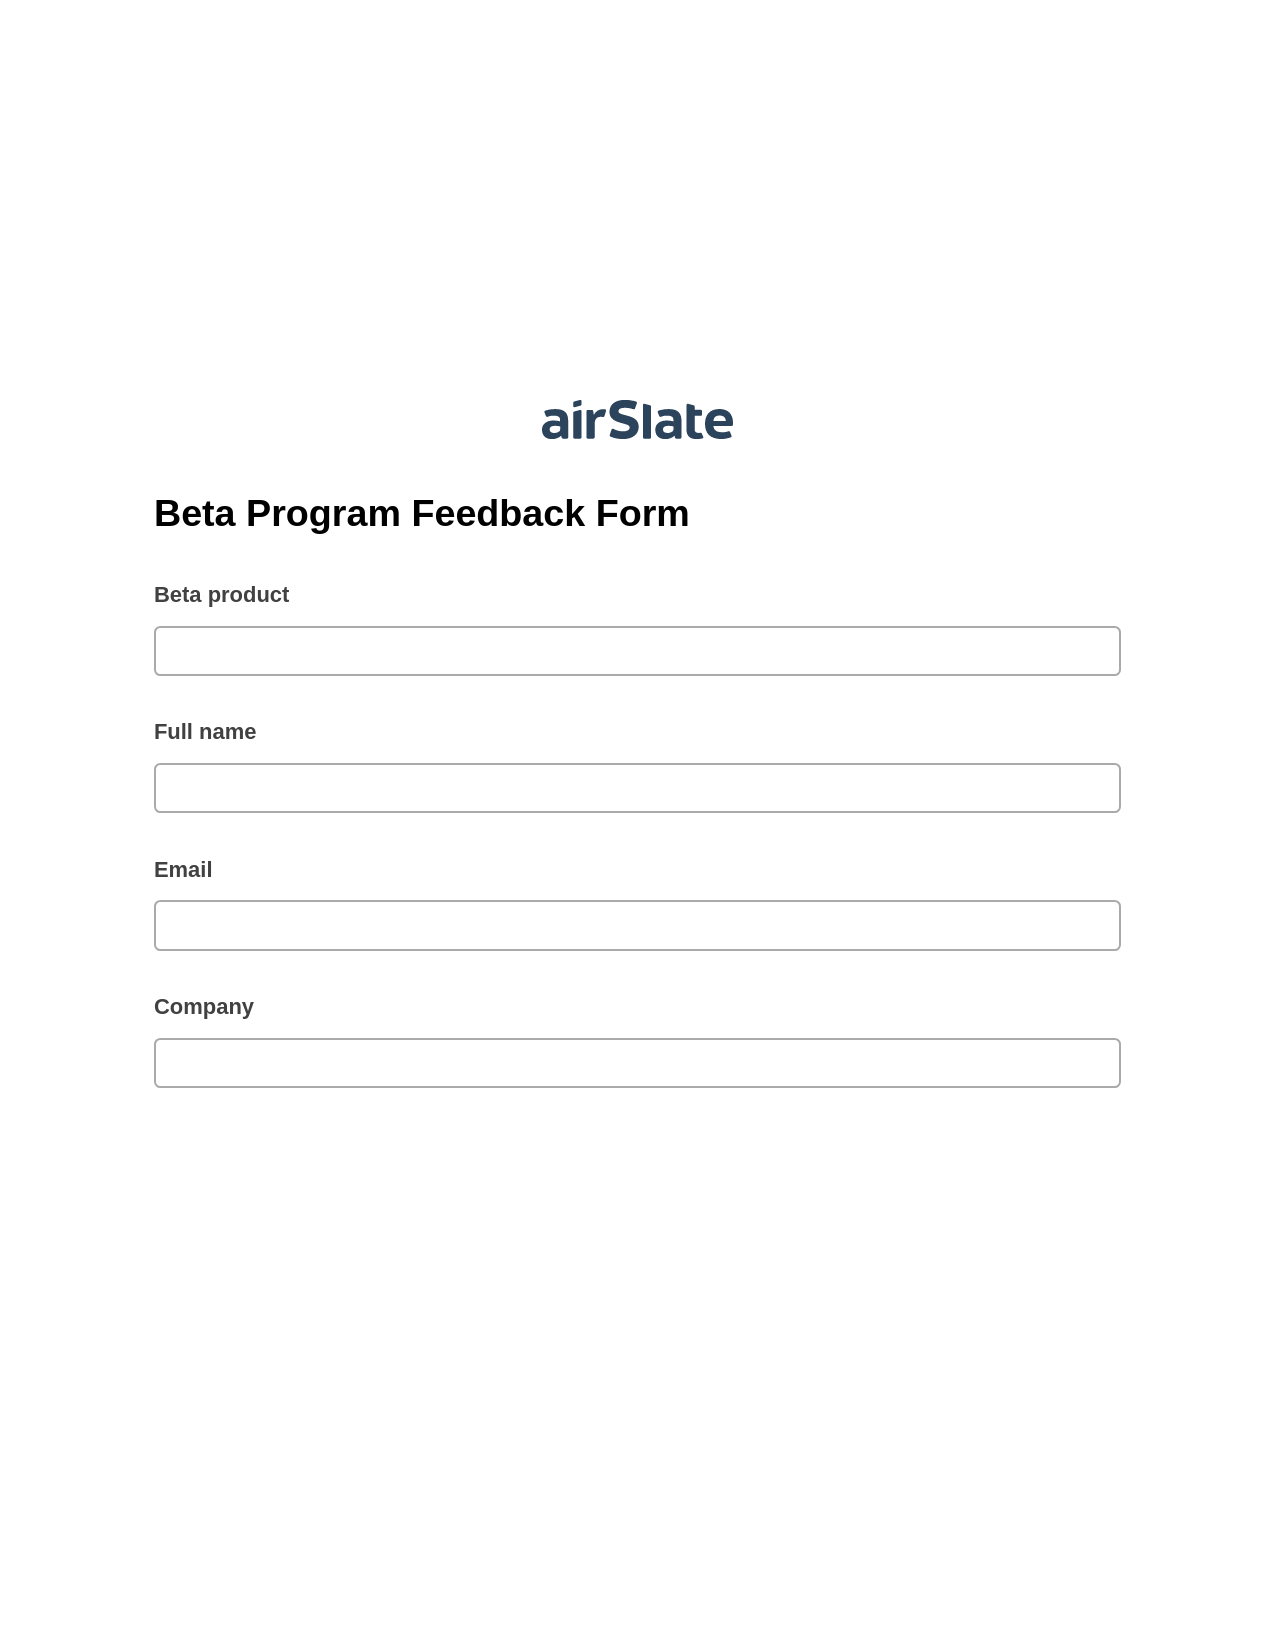 Multirole Beta Program Feedback Form Pre-fill from MySQL Bot, Open as Role Bot, Export to Excel 365 Bot